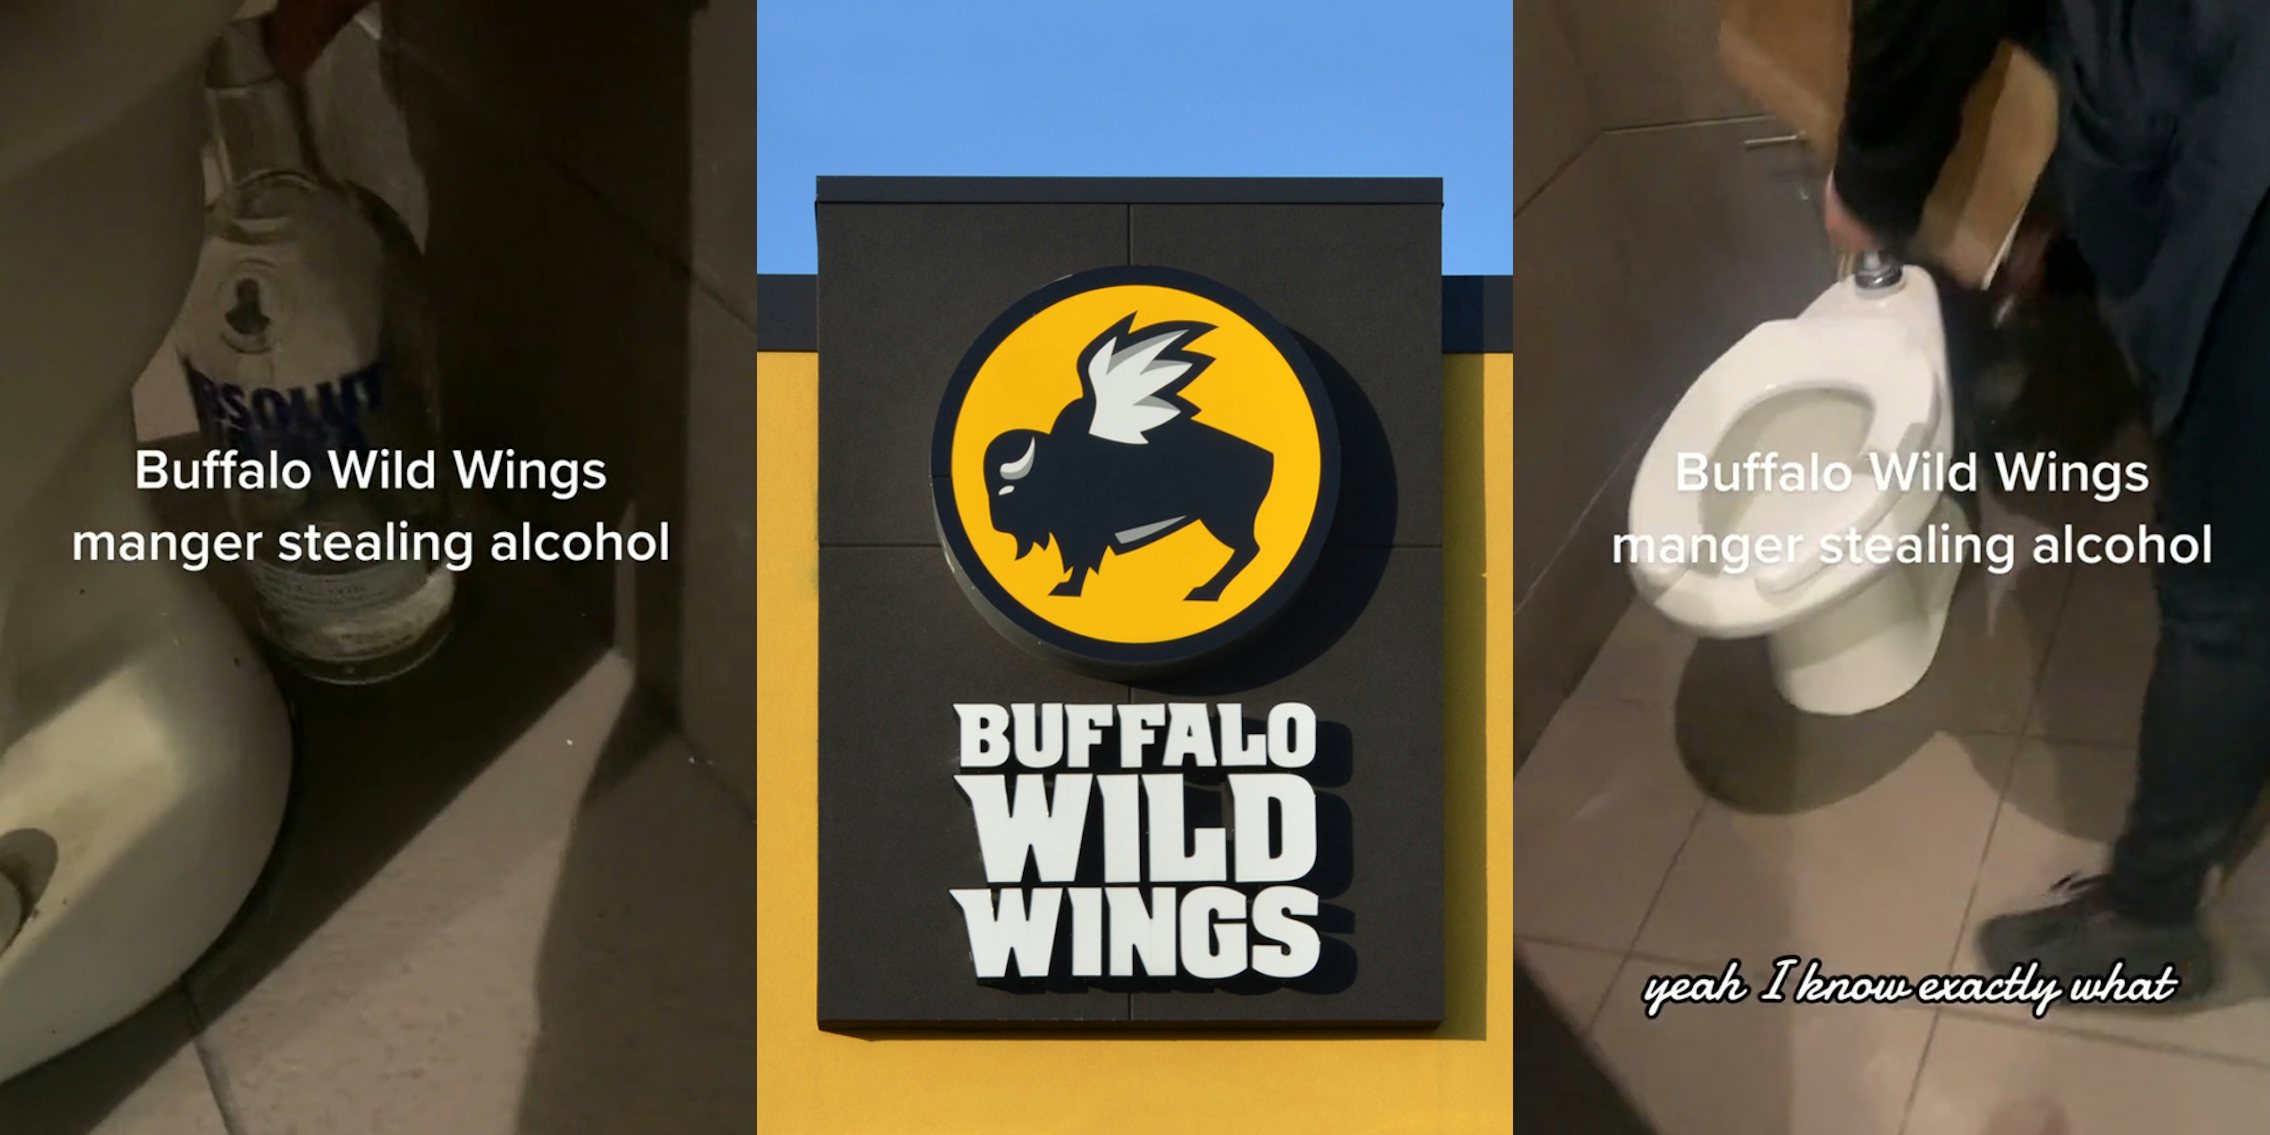 Buffalo Wild Wings toilet with Absolut Vodka bottle behind with caption 'Buffalo Wild Wings manager stealing alcohol' (l) Buffalo Wild Wings sign with blue sky (c) Buffalo Wild Wings employee grabbing bottle from behind toilet with caption 'Buffalo Wild Wings manager stealing alcohol yeah I know exactly what' (r)